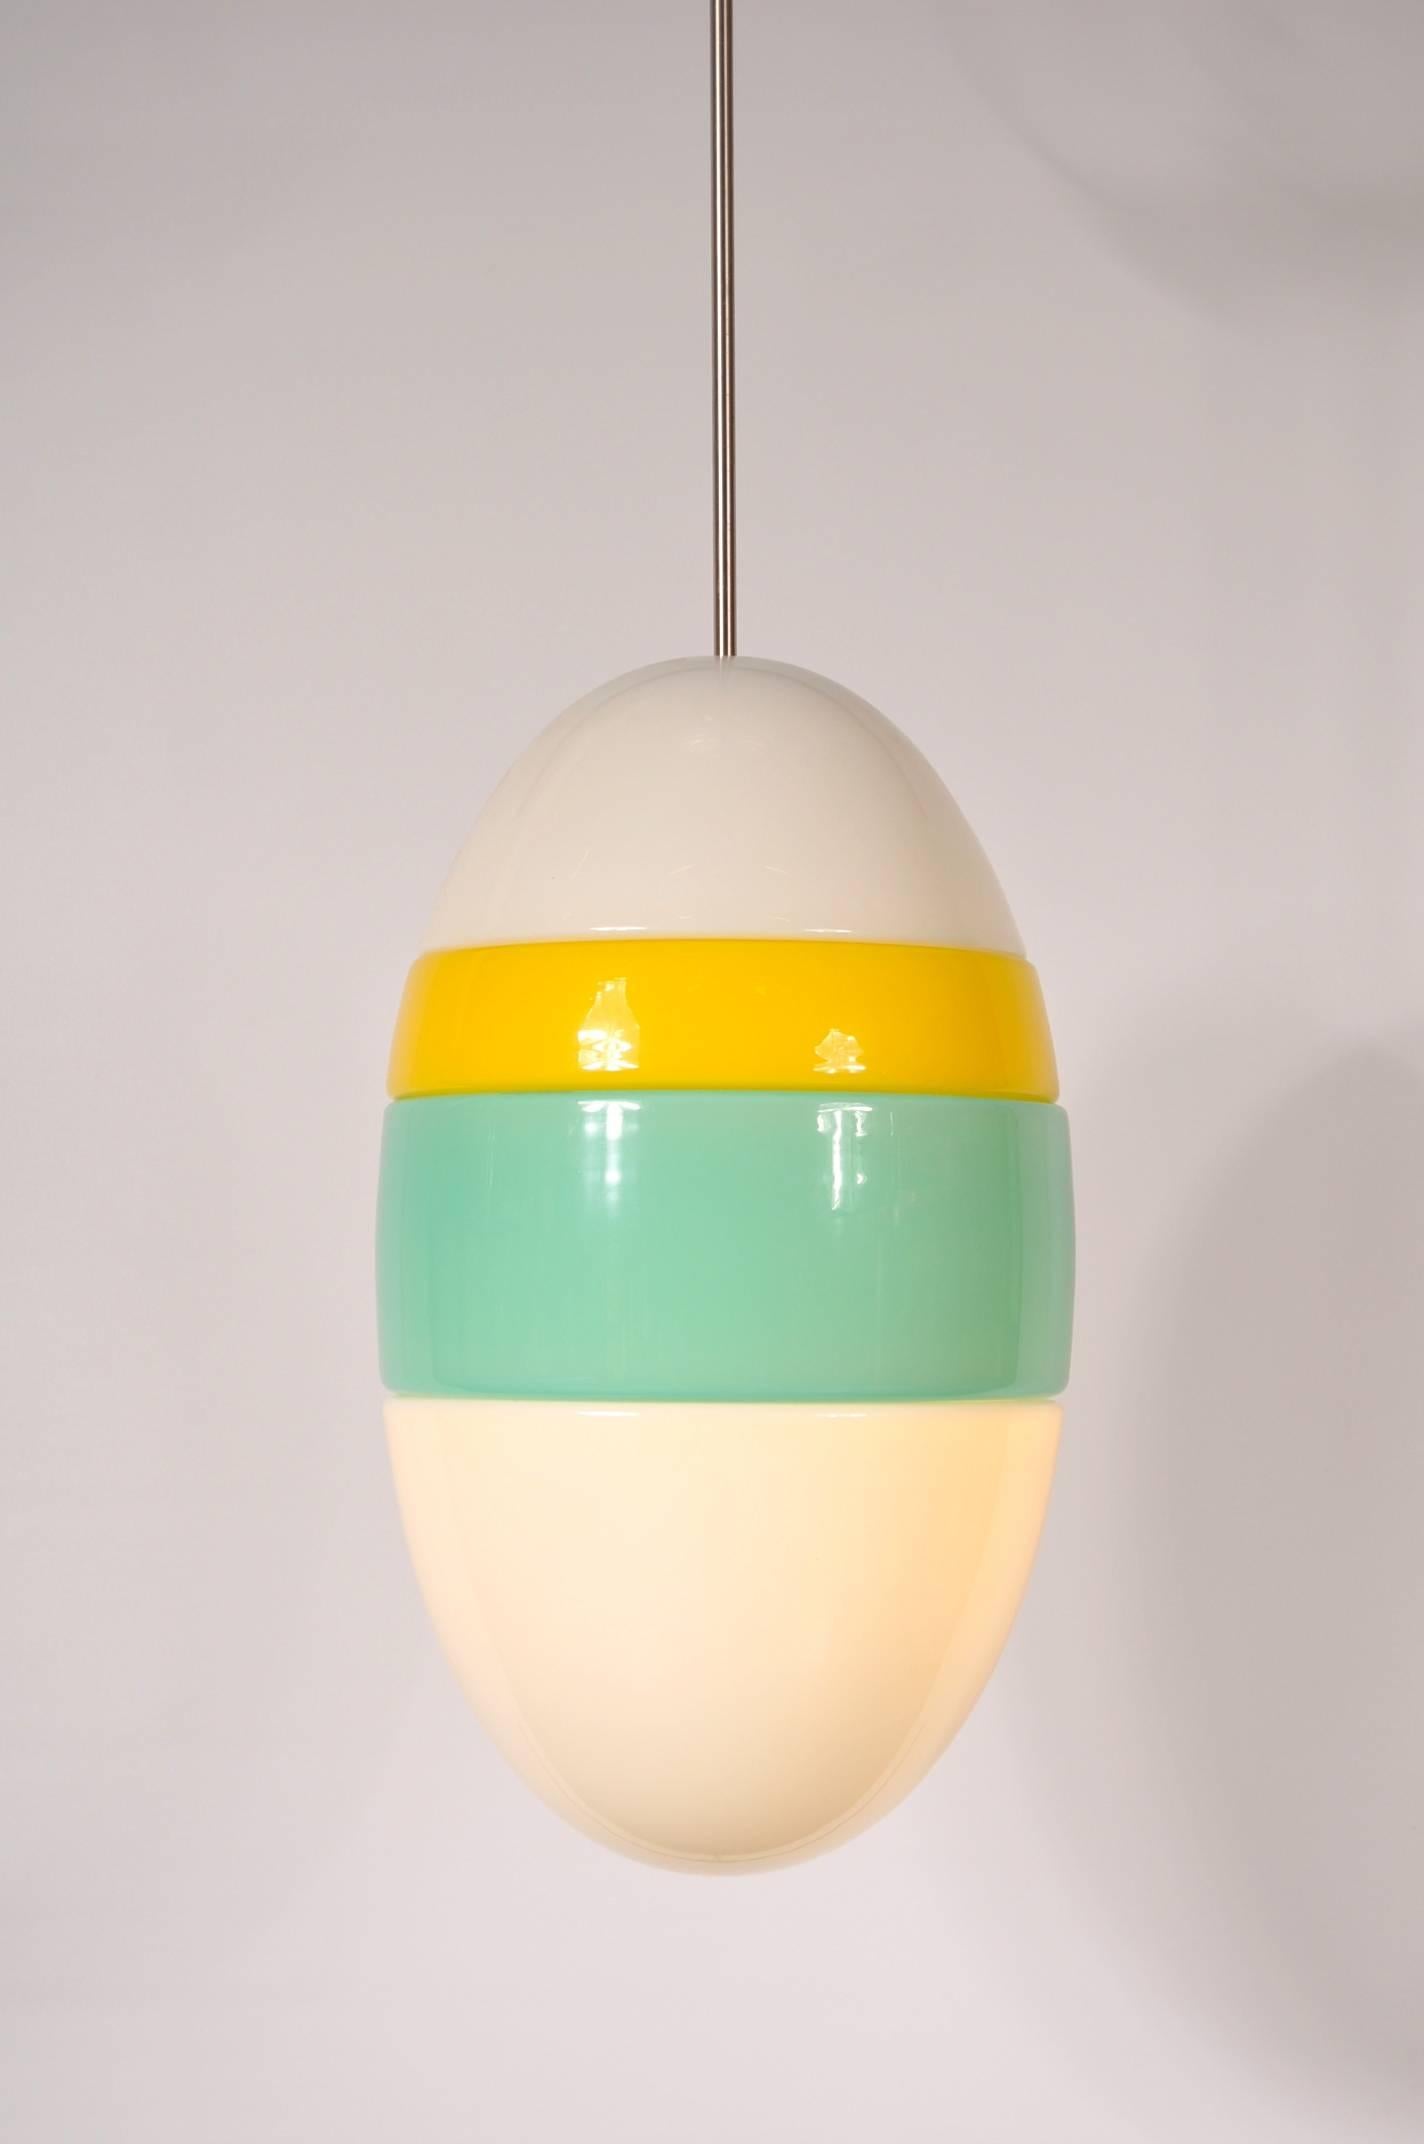 Unique hanging lamp, manufactured by Vistosi in Italy, circa 1960.

This colourful piece is made from beautiful quality Murano glass in white, green en yellow. It has a beautiful chrome metal arm to give it a nice finishing touch. It emits a very